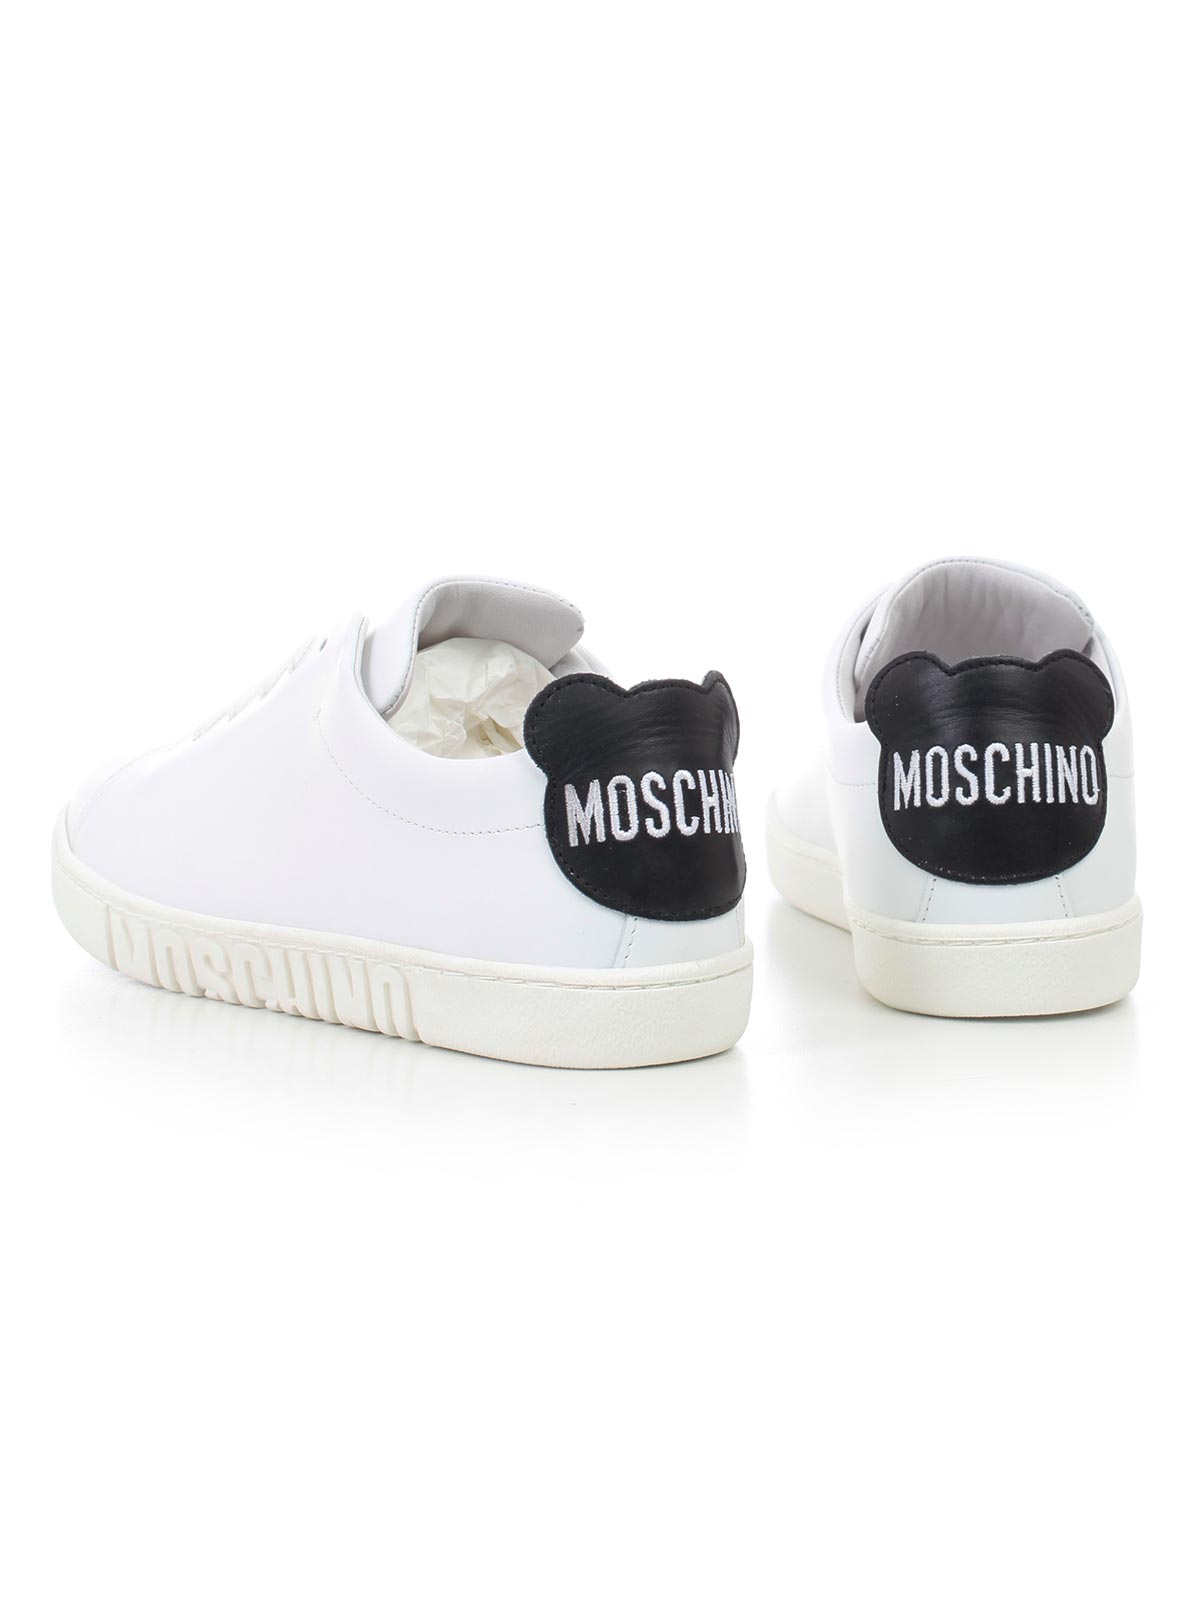 Moschino Shoes MA15012G17.ME2SNEAKERS 